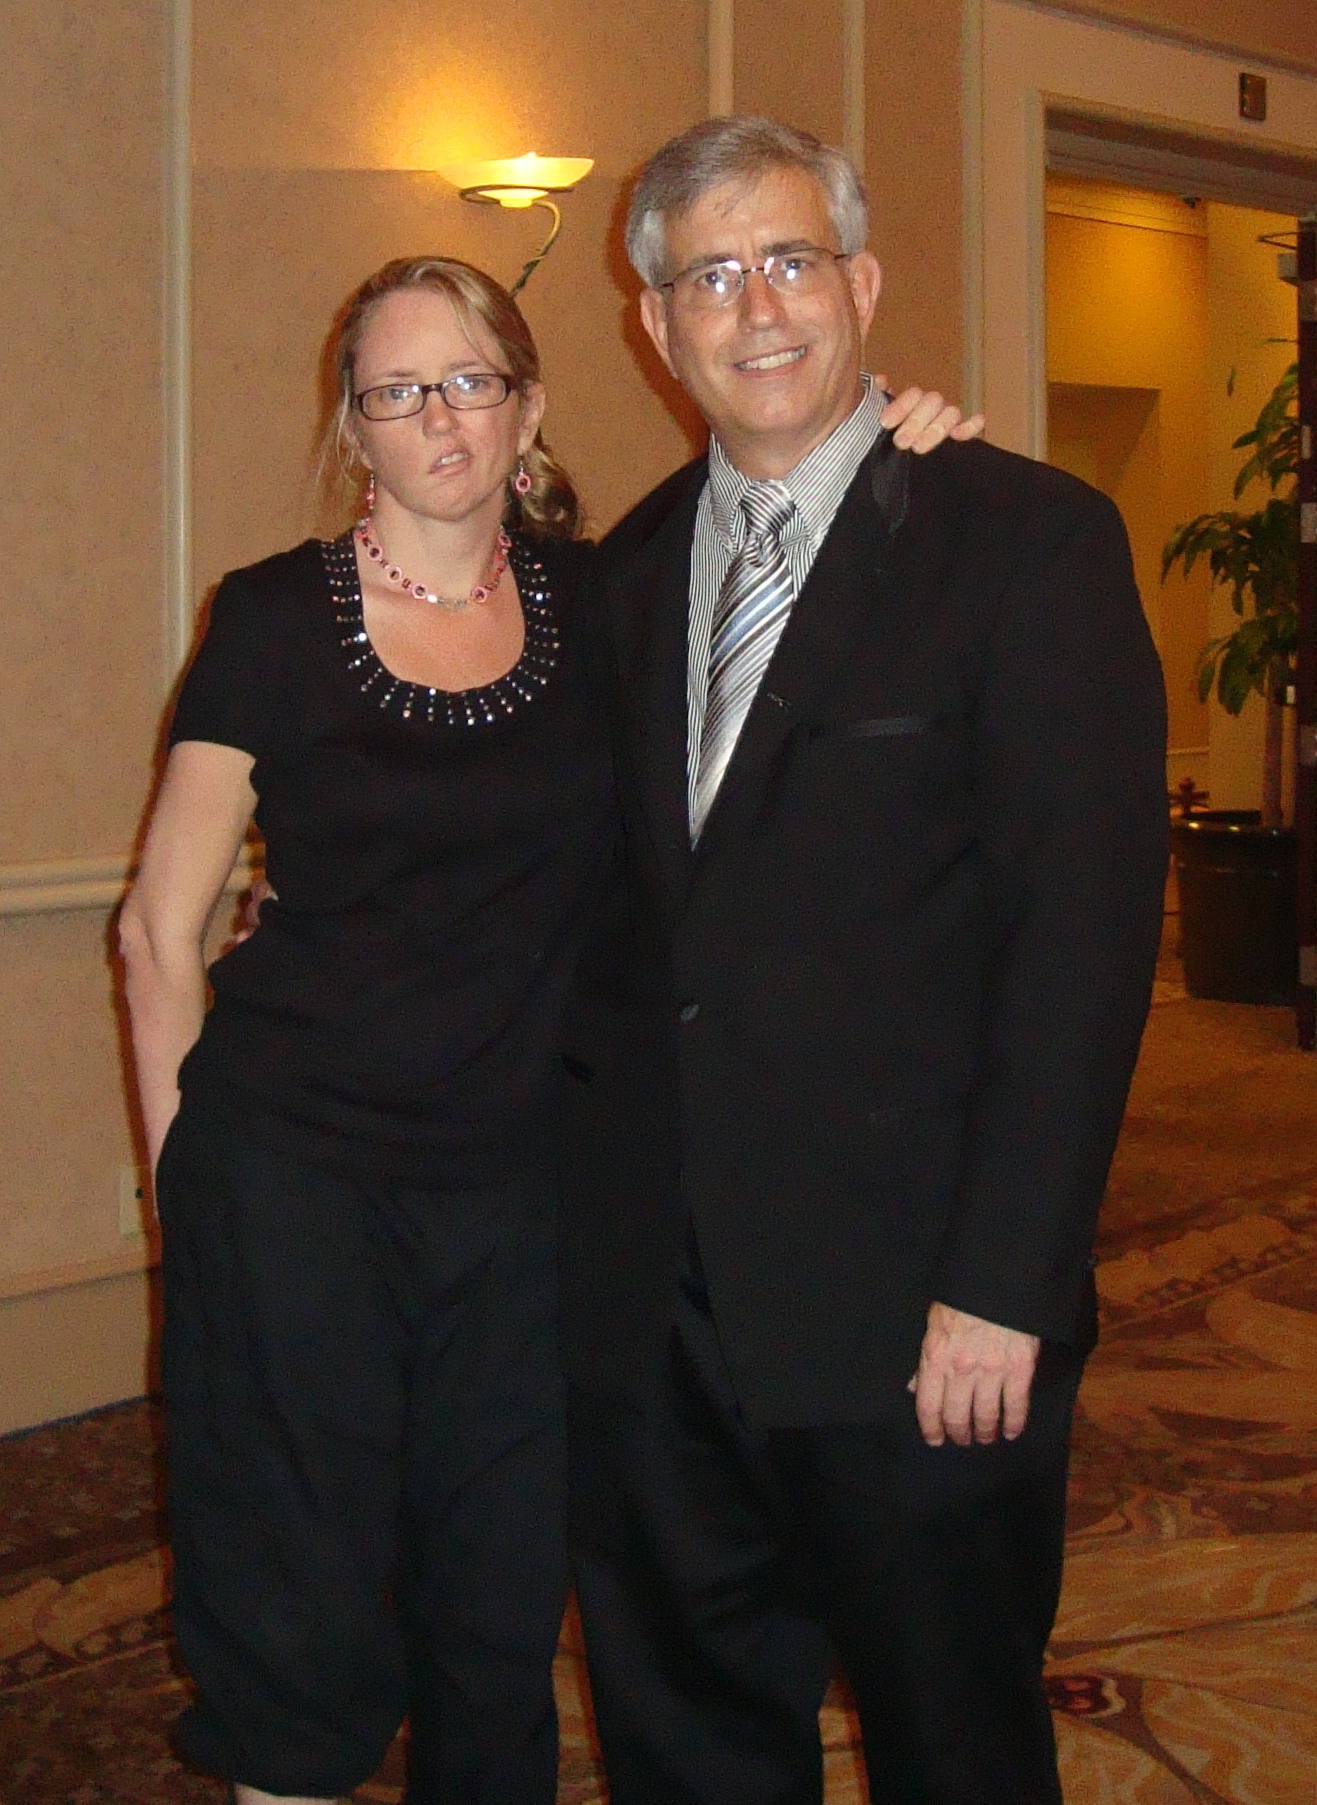 Cindy Reese dressed up in black pantsuit standing on left arm in arm with Bill Reese in suit standing on right